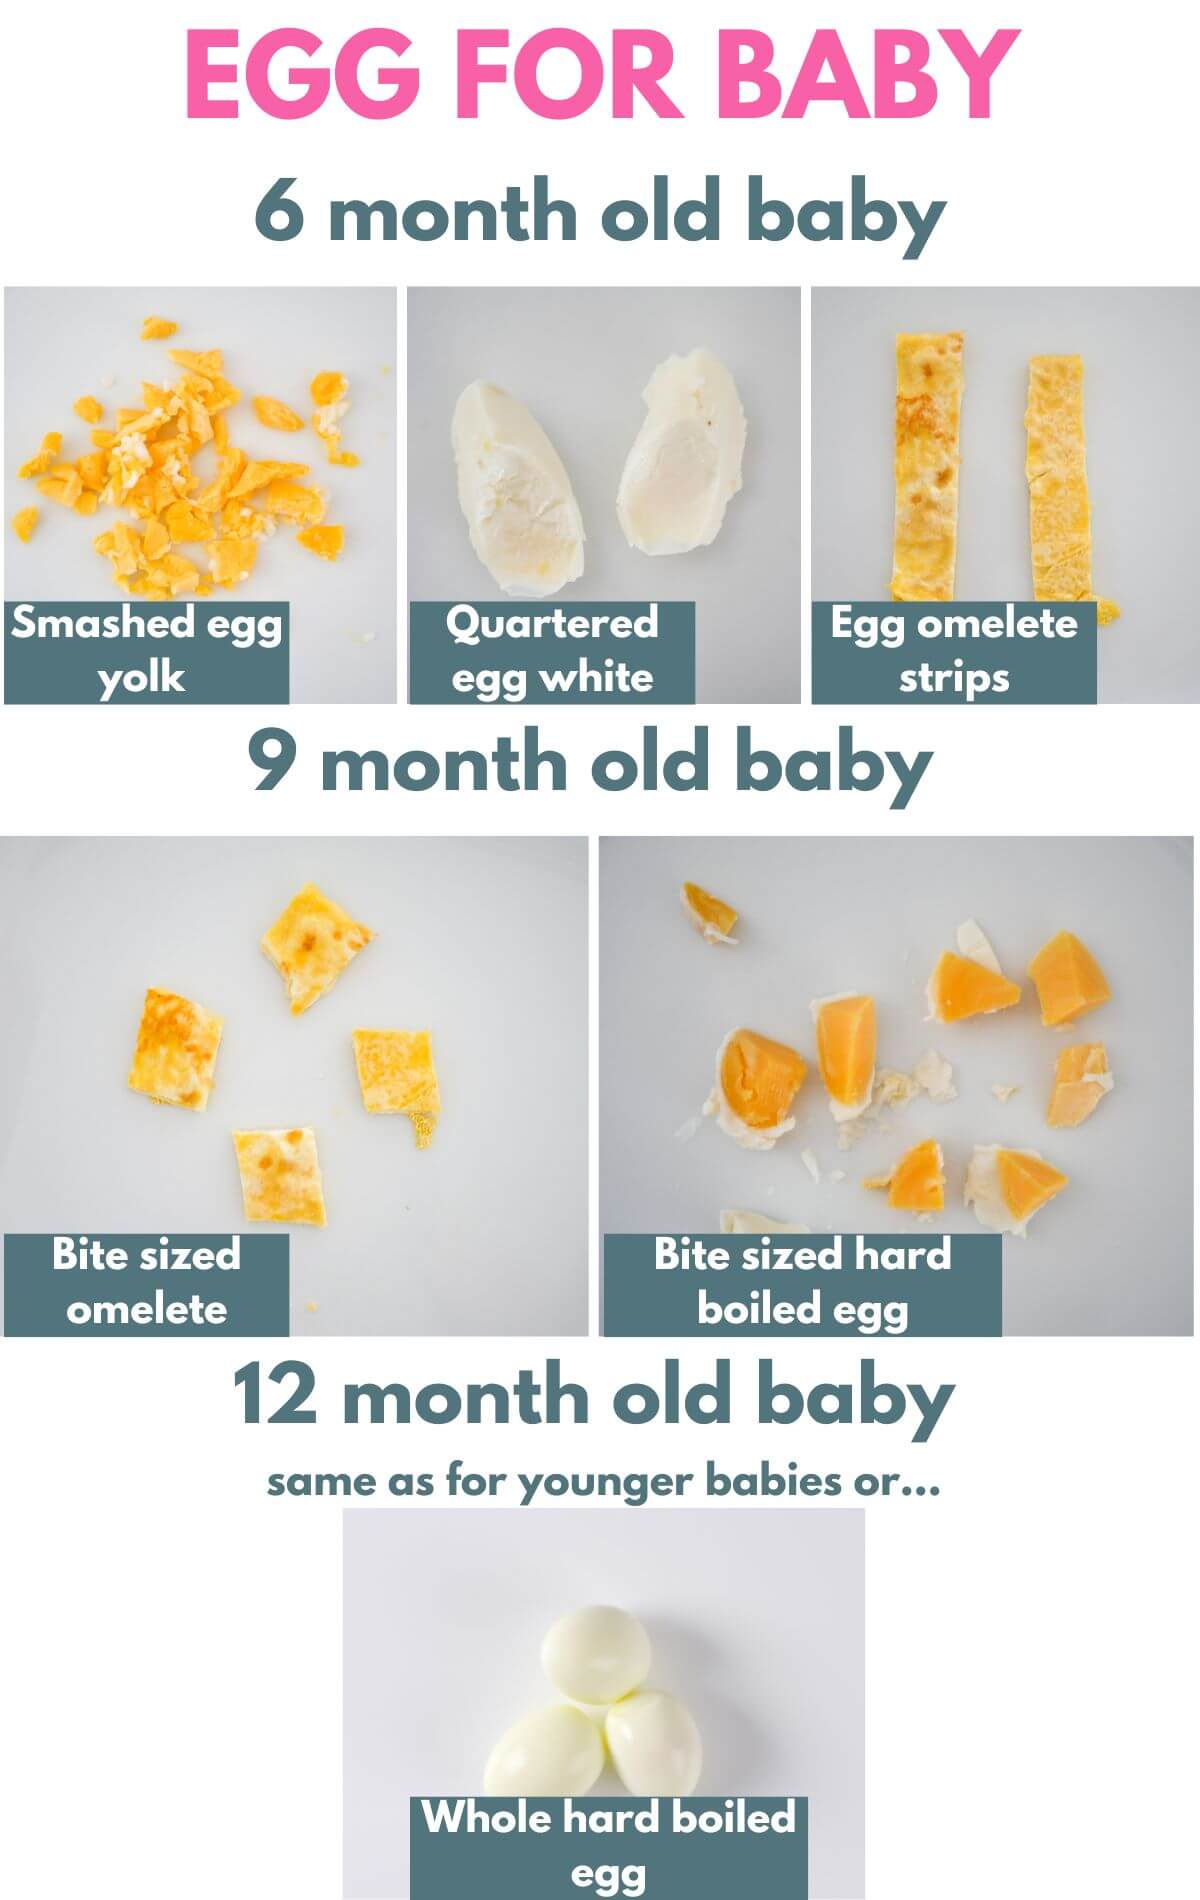 title with 5 images showing how to serve eggs for baby led weaning with text explaining